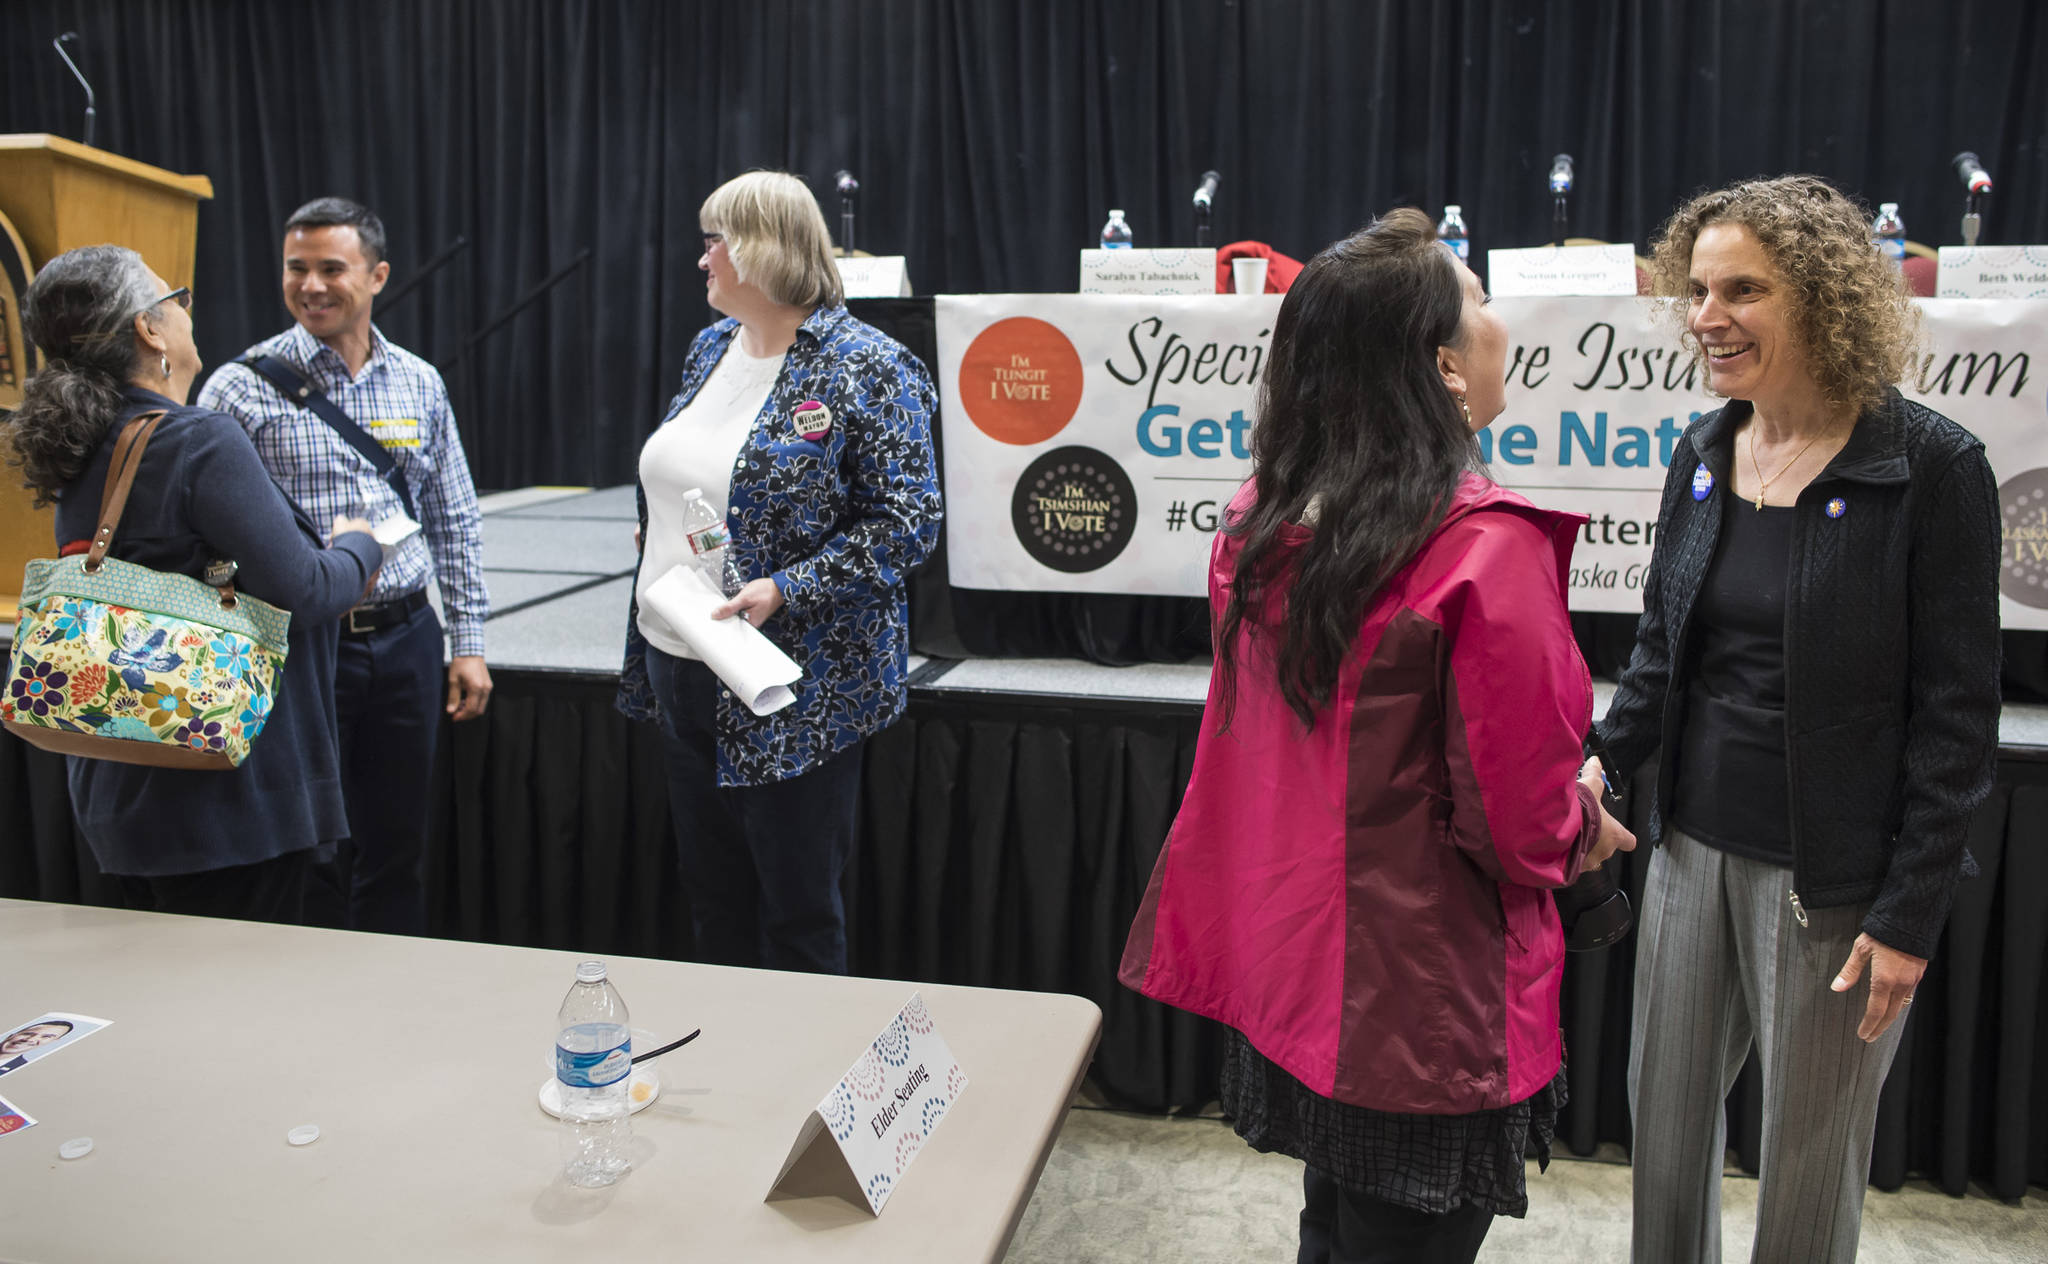 Mayoral candidates Saralyn Tabachnick, right, Norton Gregory, left, and Beth Weldon, center, speak to Juneau residents after a Special Native Issues Forum at the Elizabeth Peratrovich Hall on Tuesday, Sept. 18, 2018. (Michael Penn | Juneau Empire)